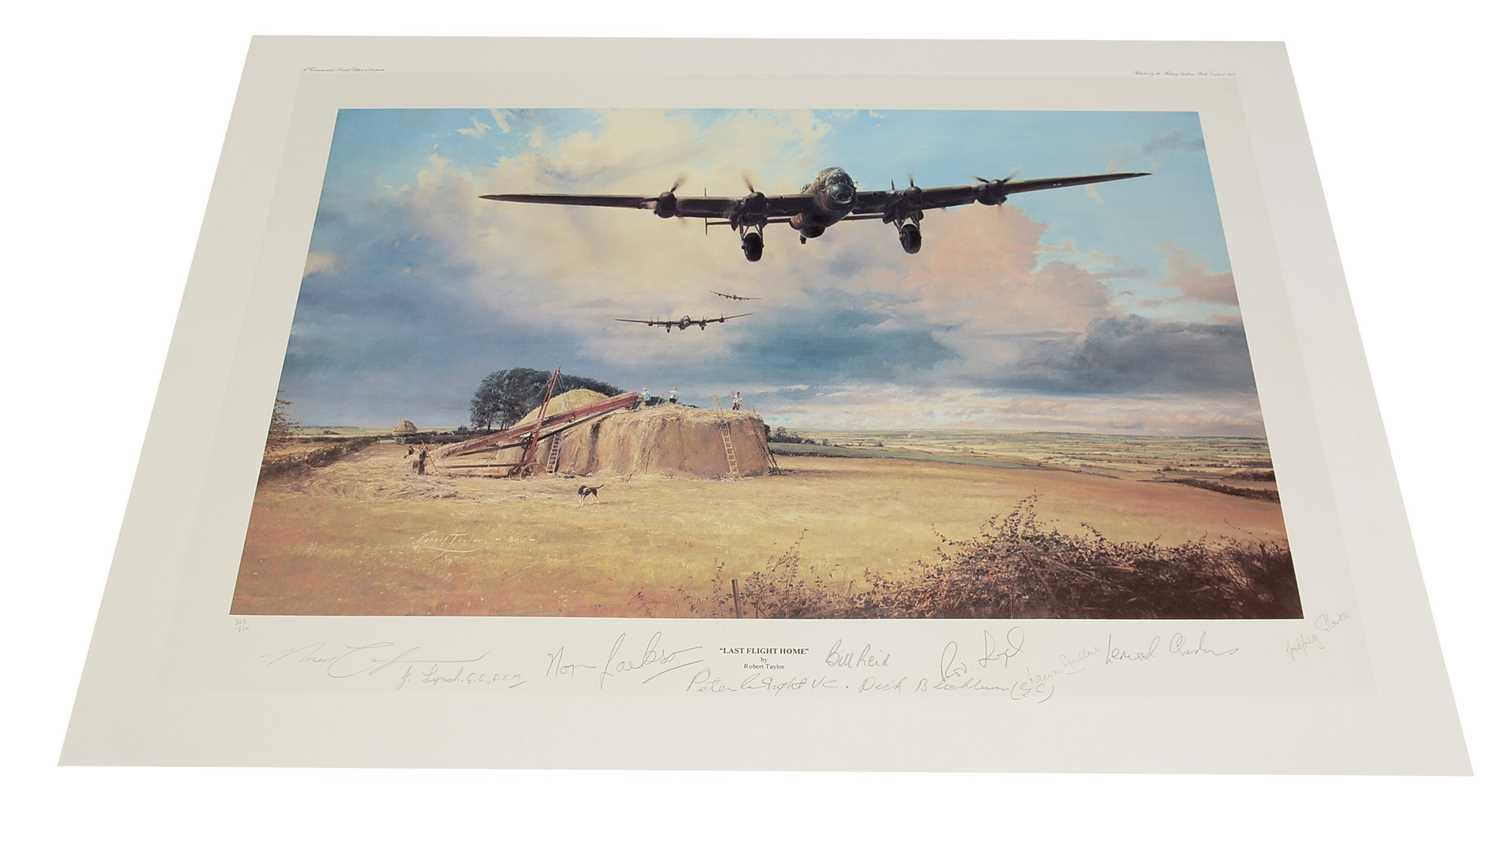 Limited edition print after Robert Taylor 'Last Flight Home',